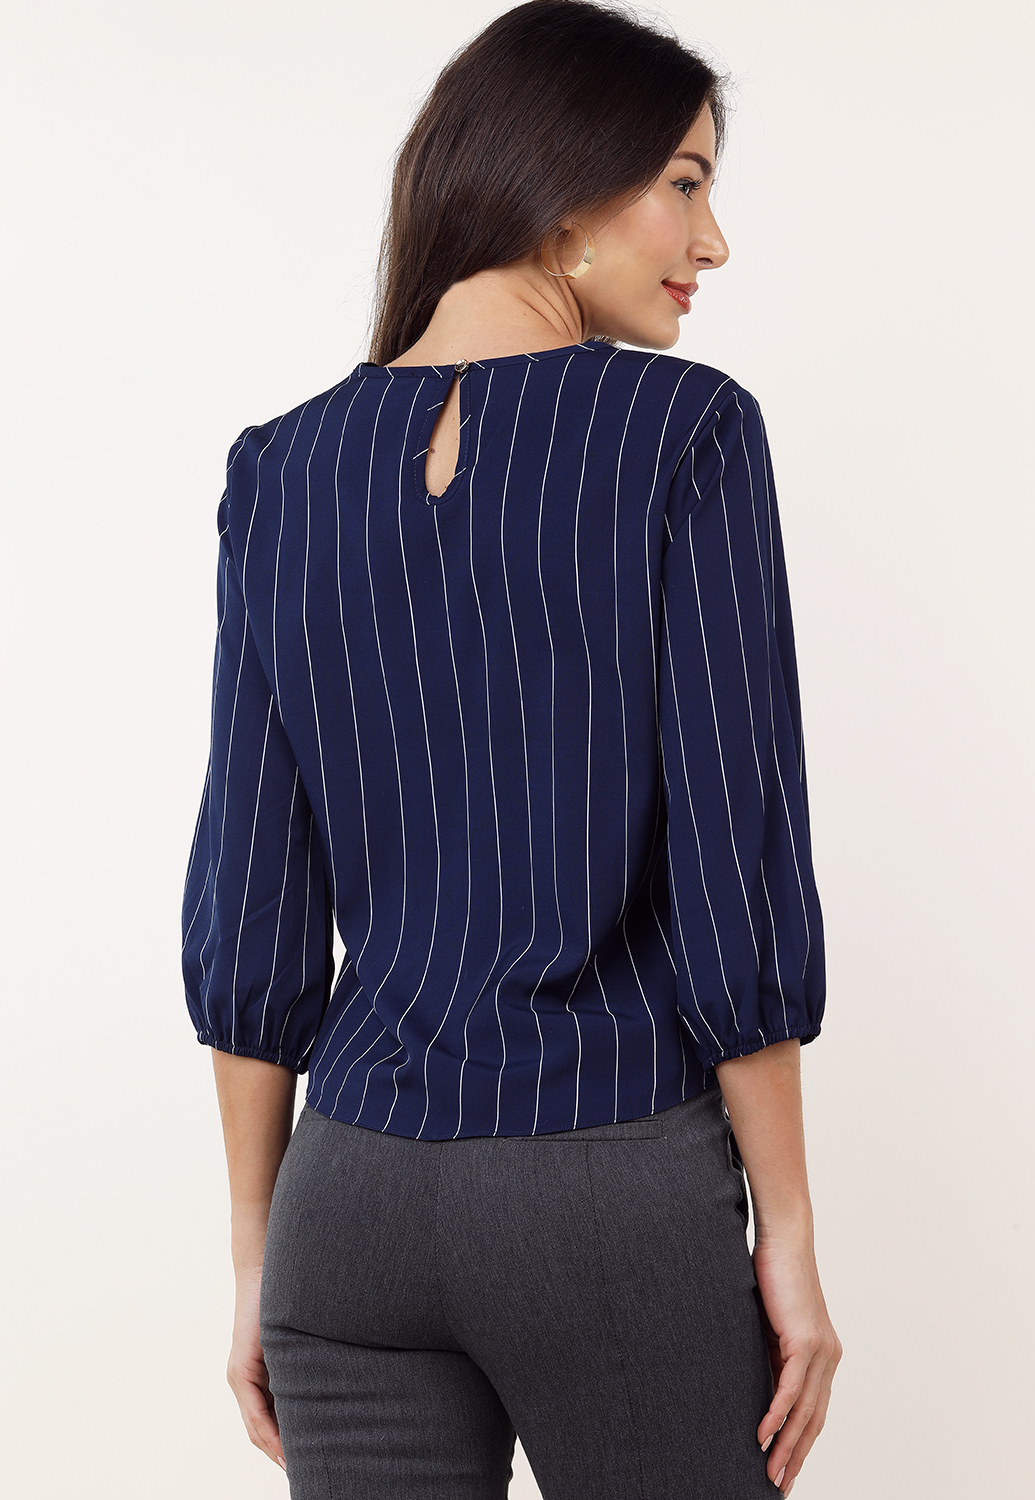  Pinstriped Tie Front Top